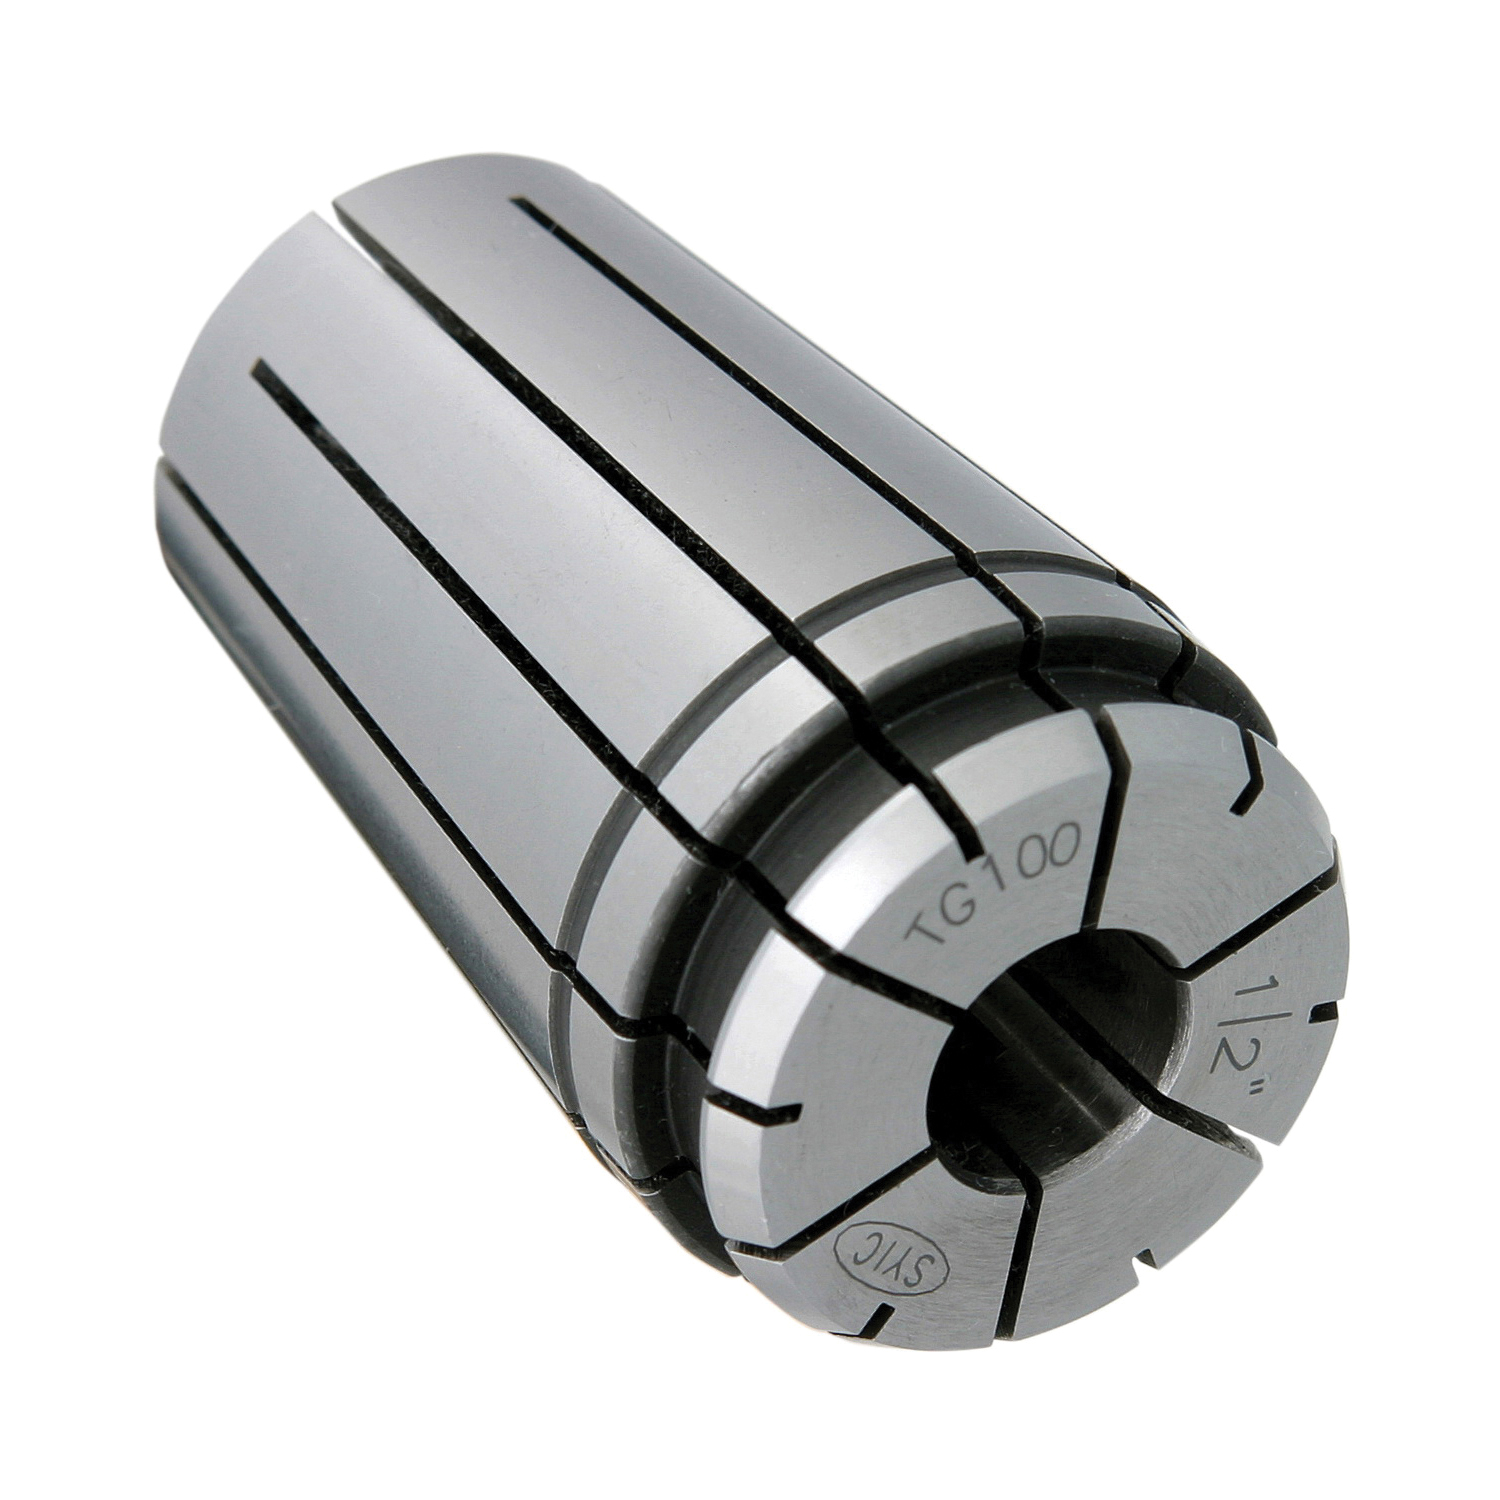 TG100 5/16" COLLET